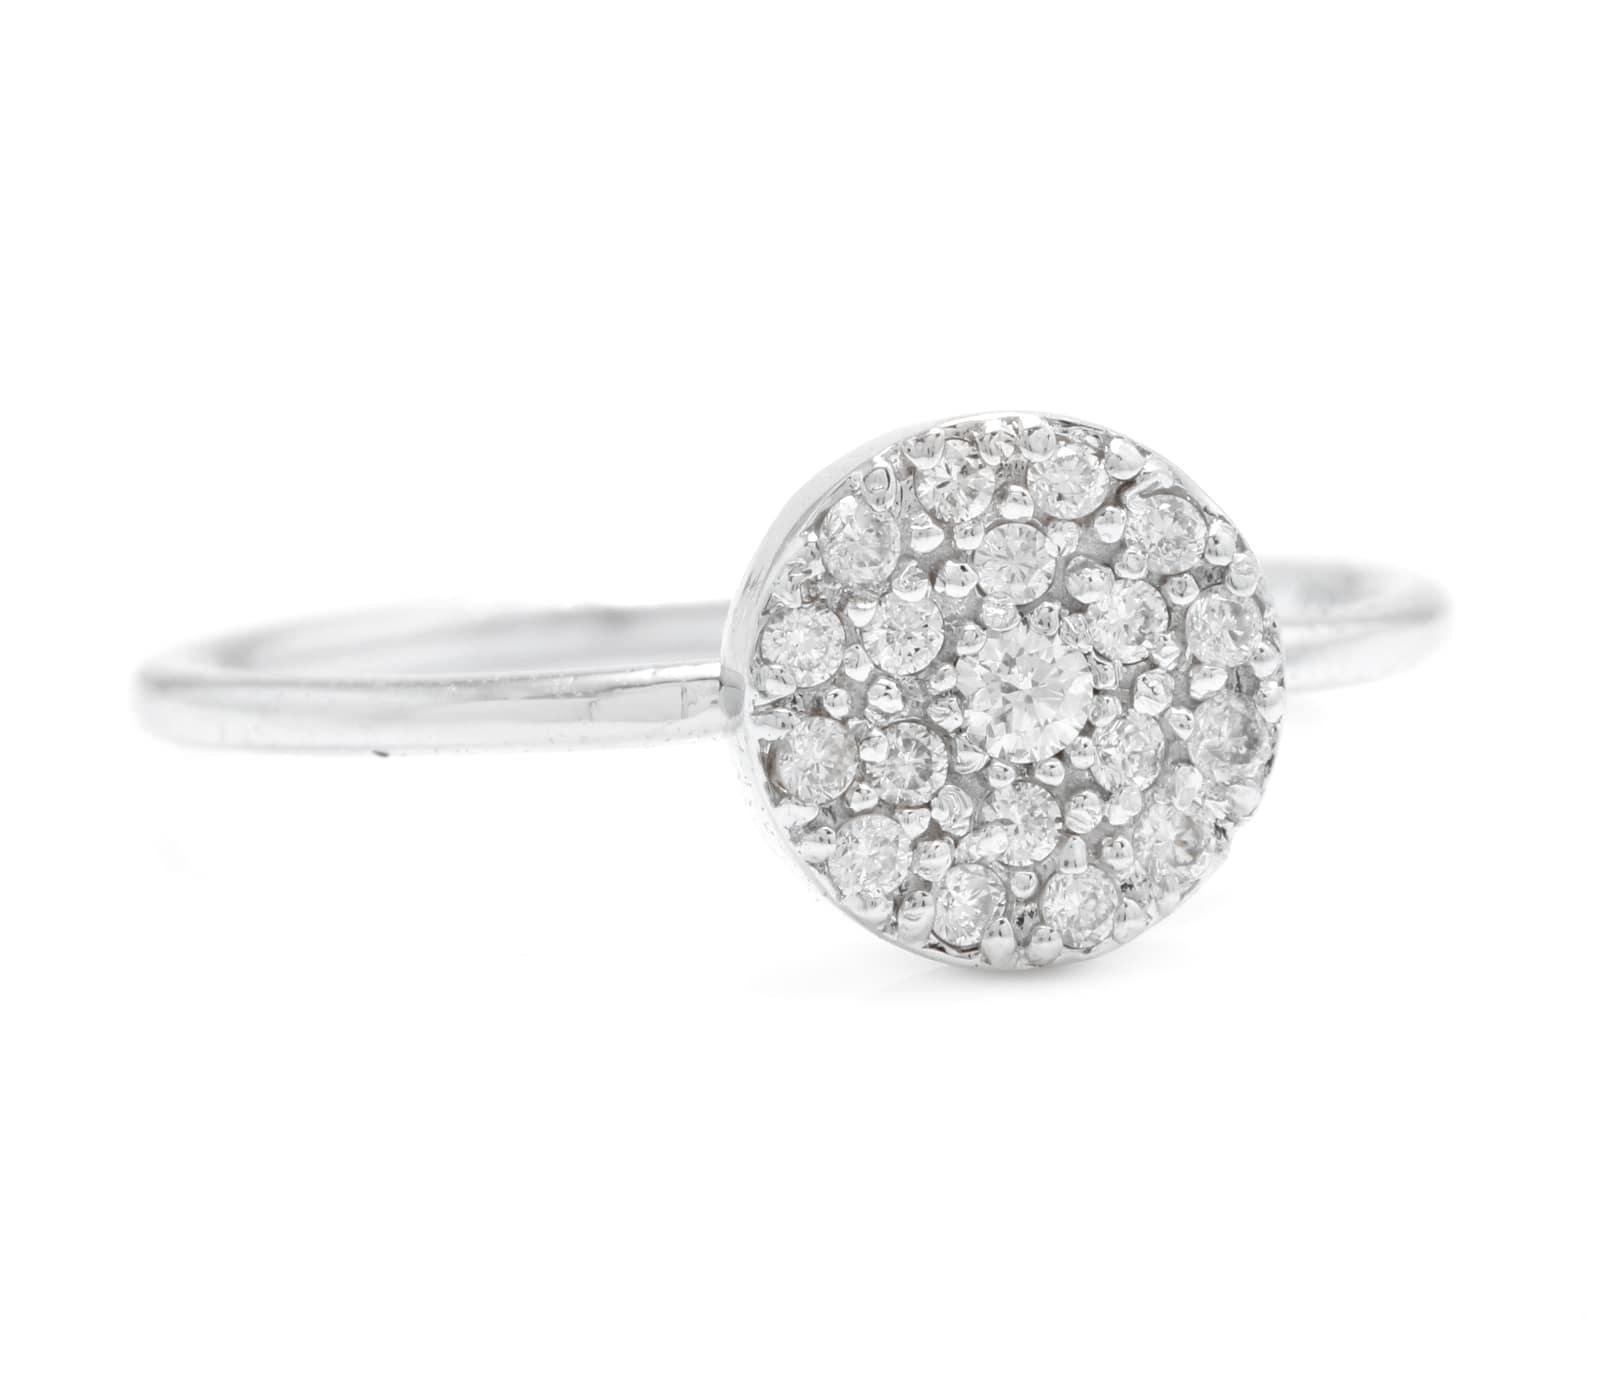 Splendid 0.15 Carats Natural Diamond 14K Solid White Gold Ring

Stamped: 14K

Total Natural Round Cut Diamonds Weight: Approx. 0.15 Carats (color G-H / Clarity SI1-SI2)

Diameter of the ring is: 7.6mm

Ring size: 5.75 (we offer free re-sizing upon